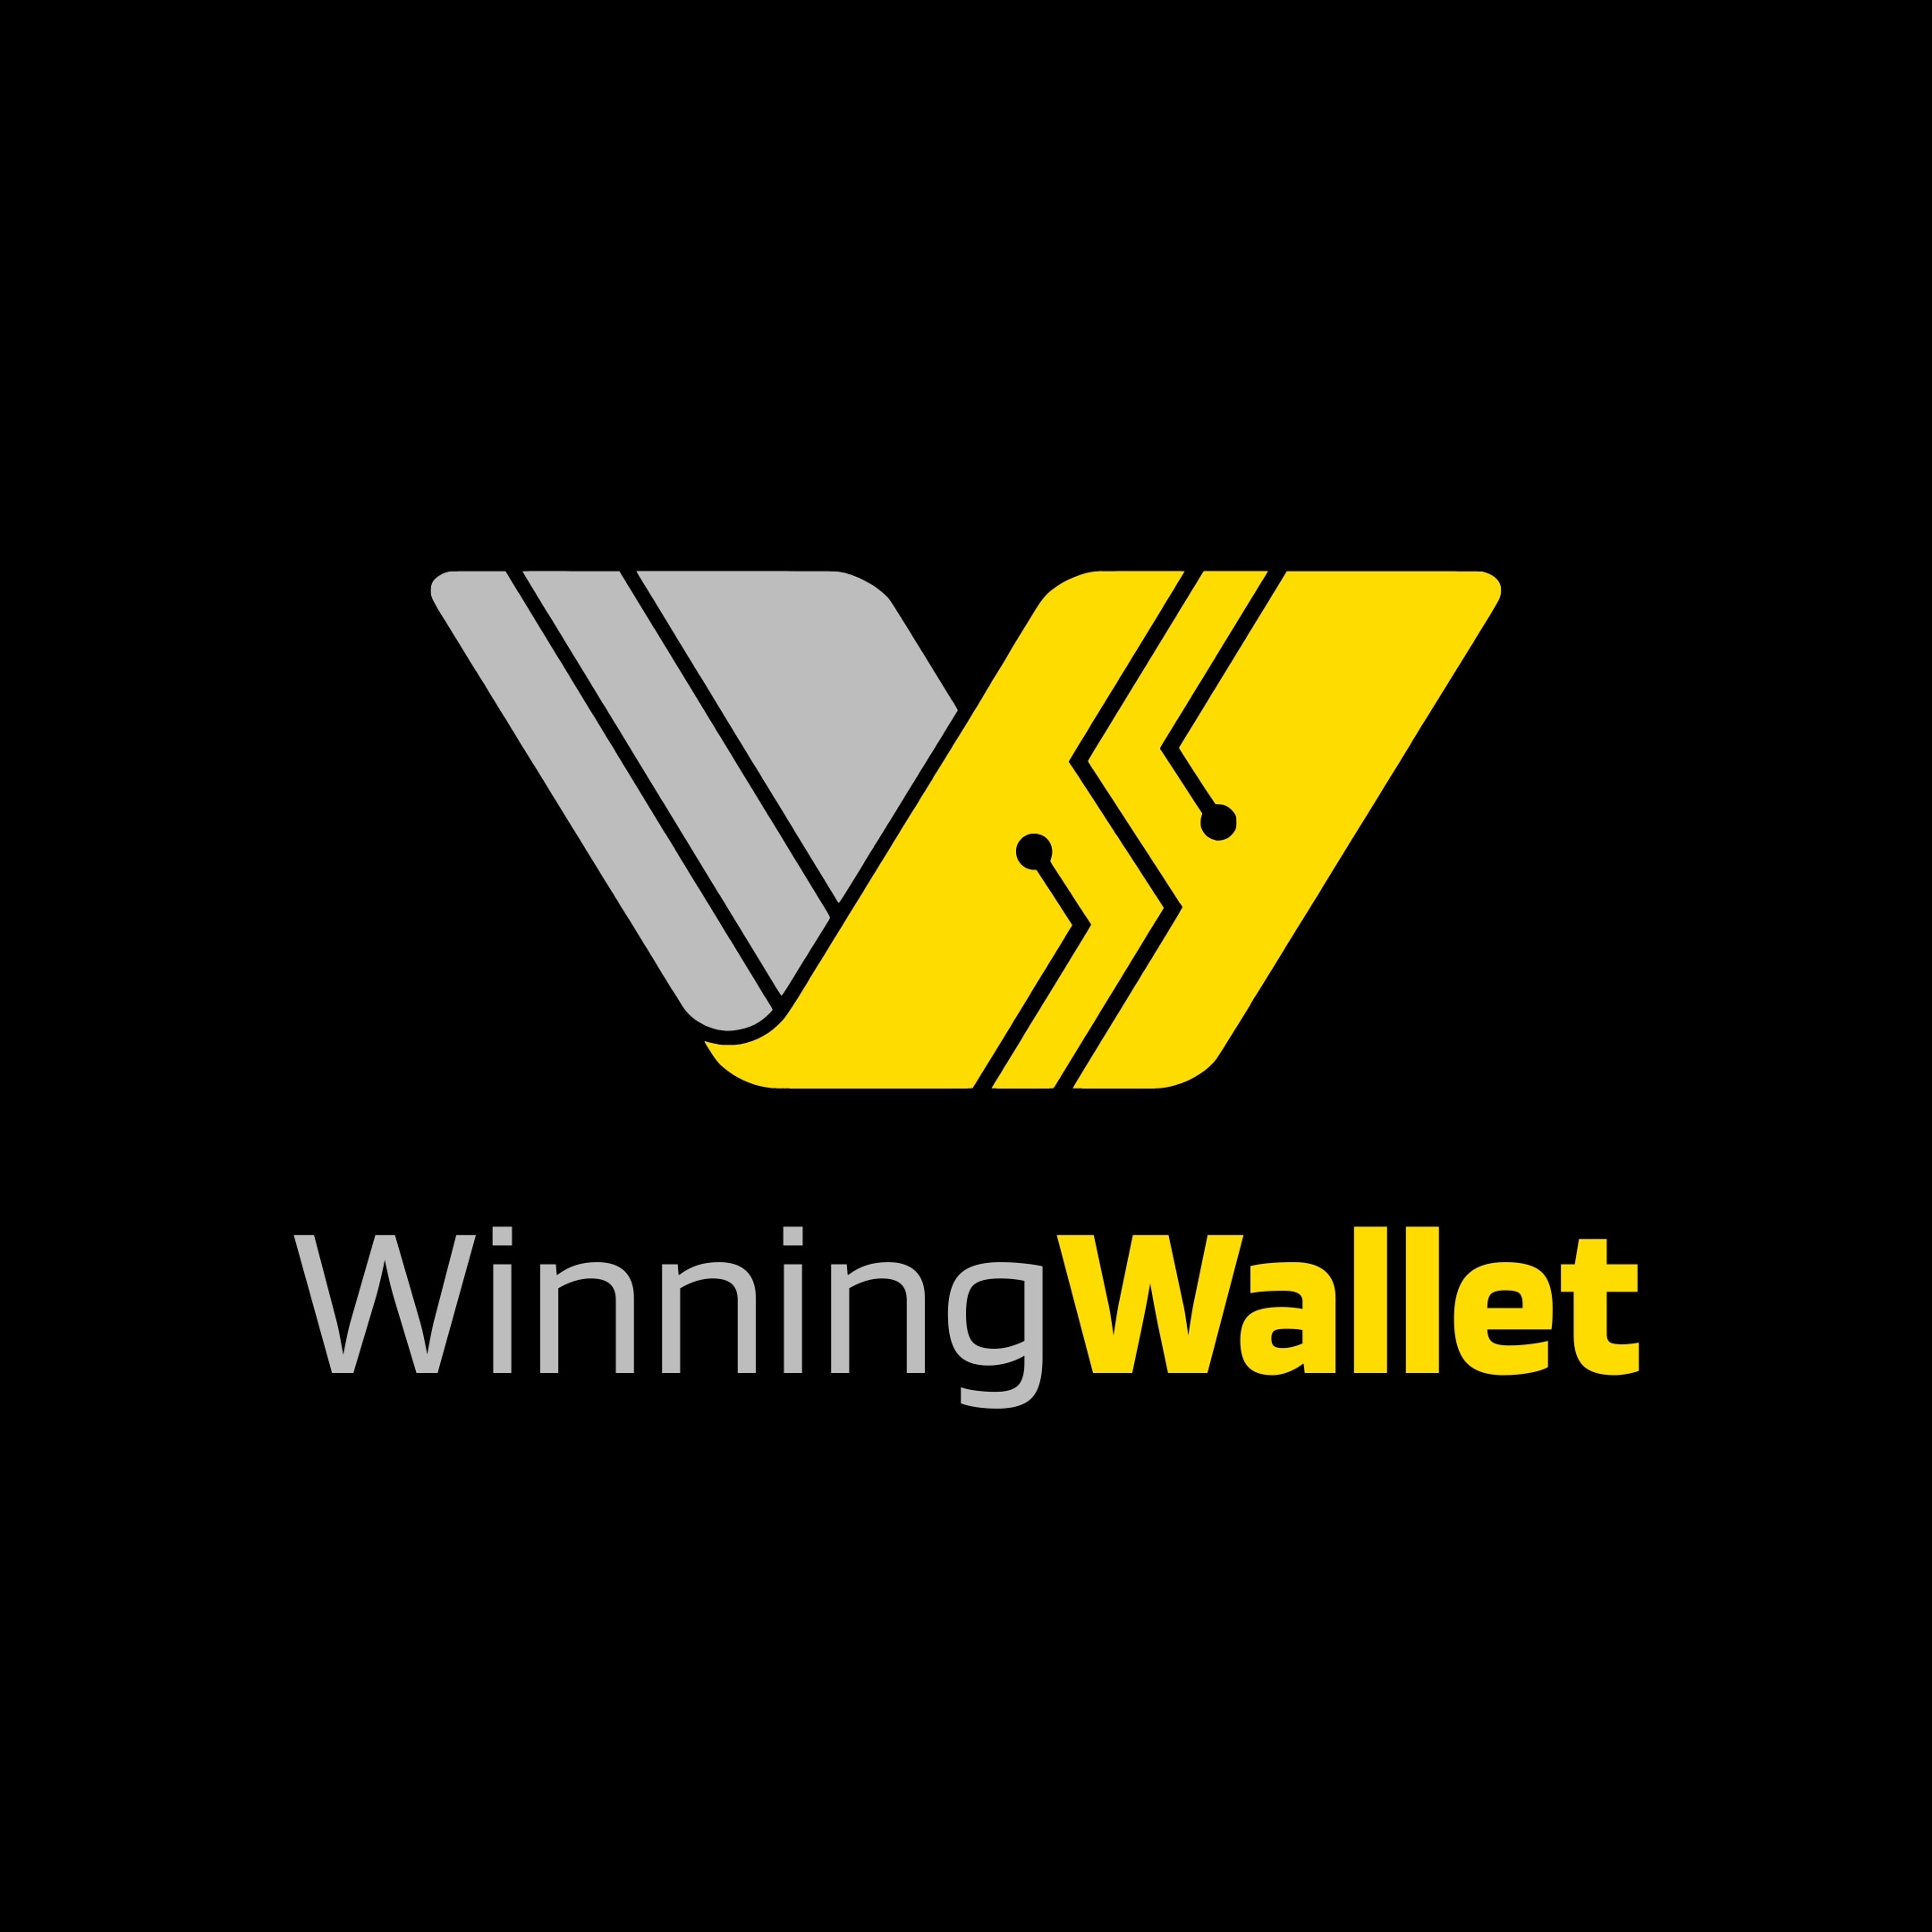 WinningWalletTrading Introduces Passive Income with Innovative EA Trading Services